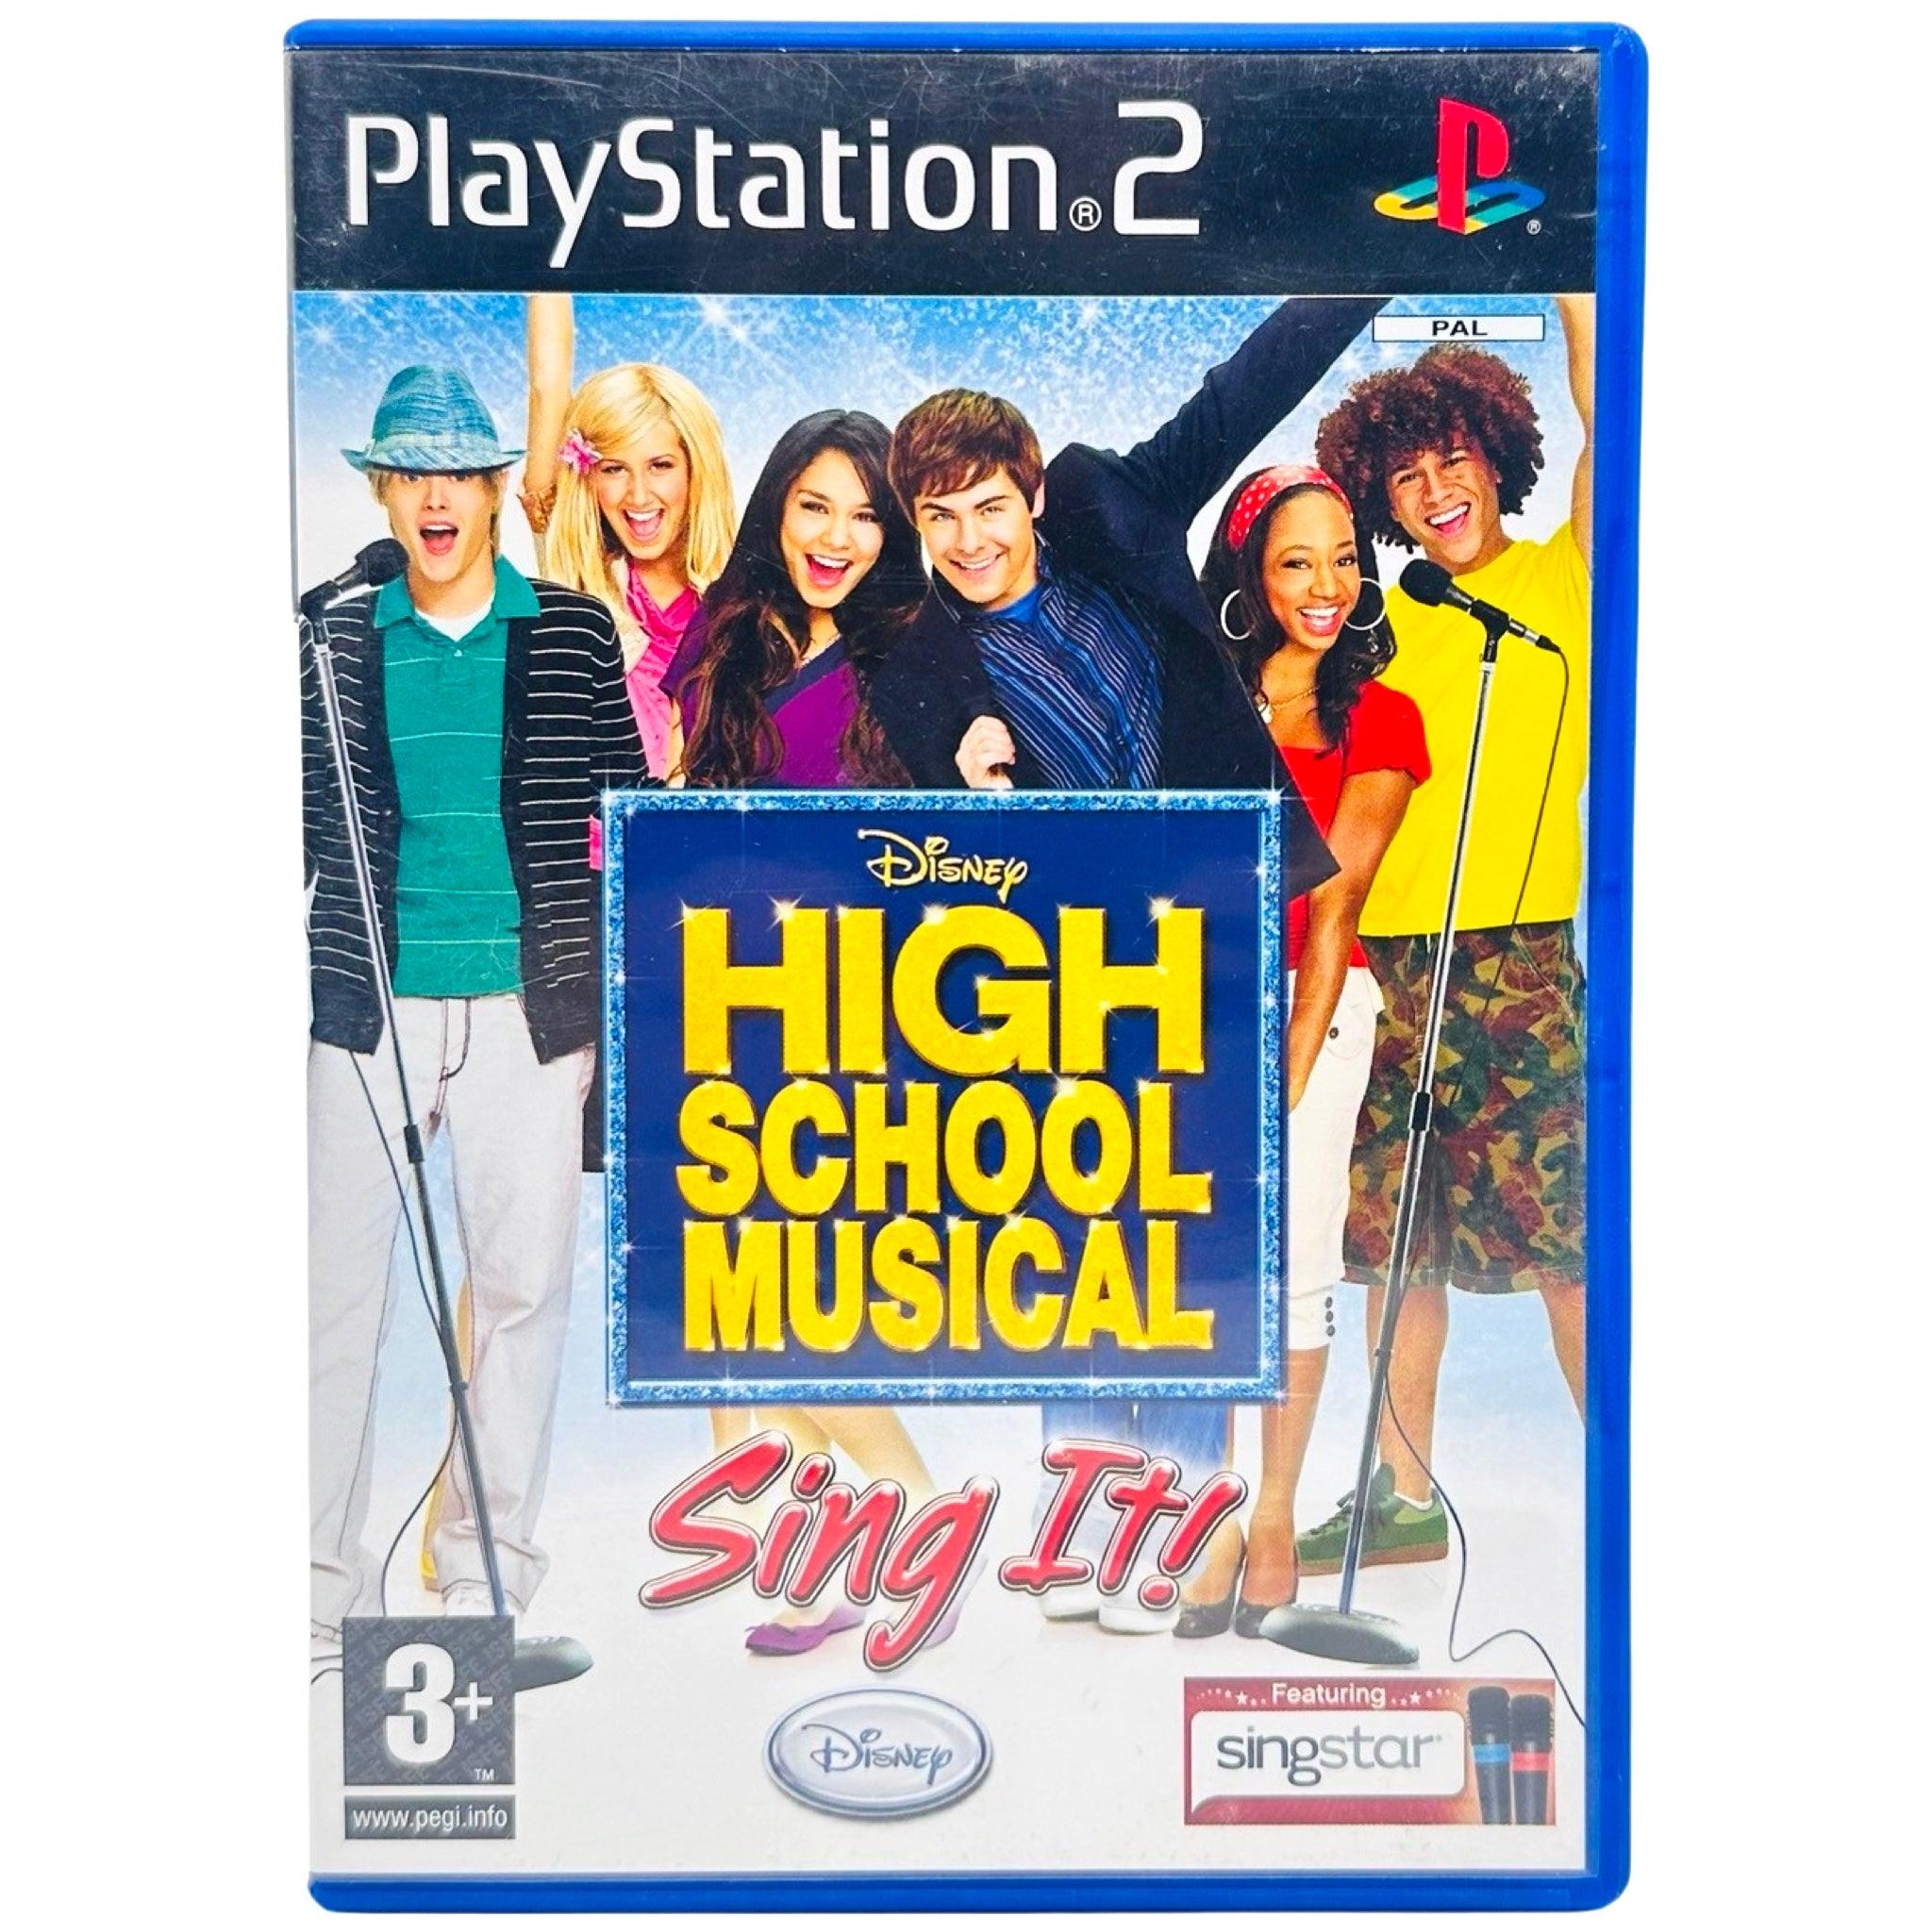 PS2: High School Musical: Sing It - RetroGaming.no